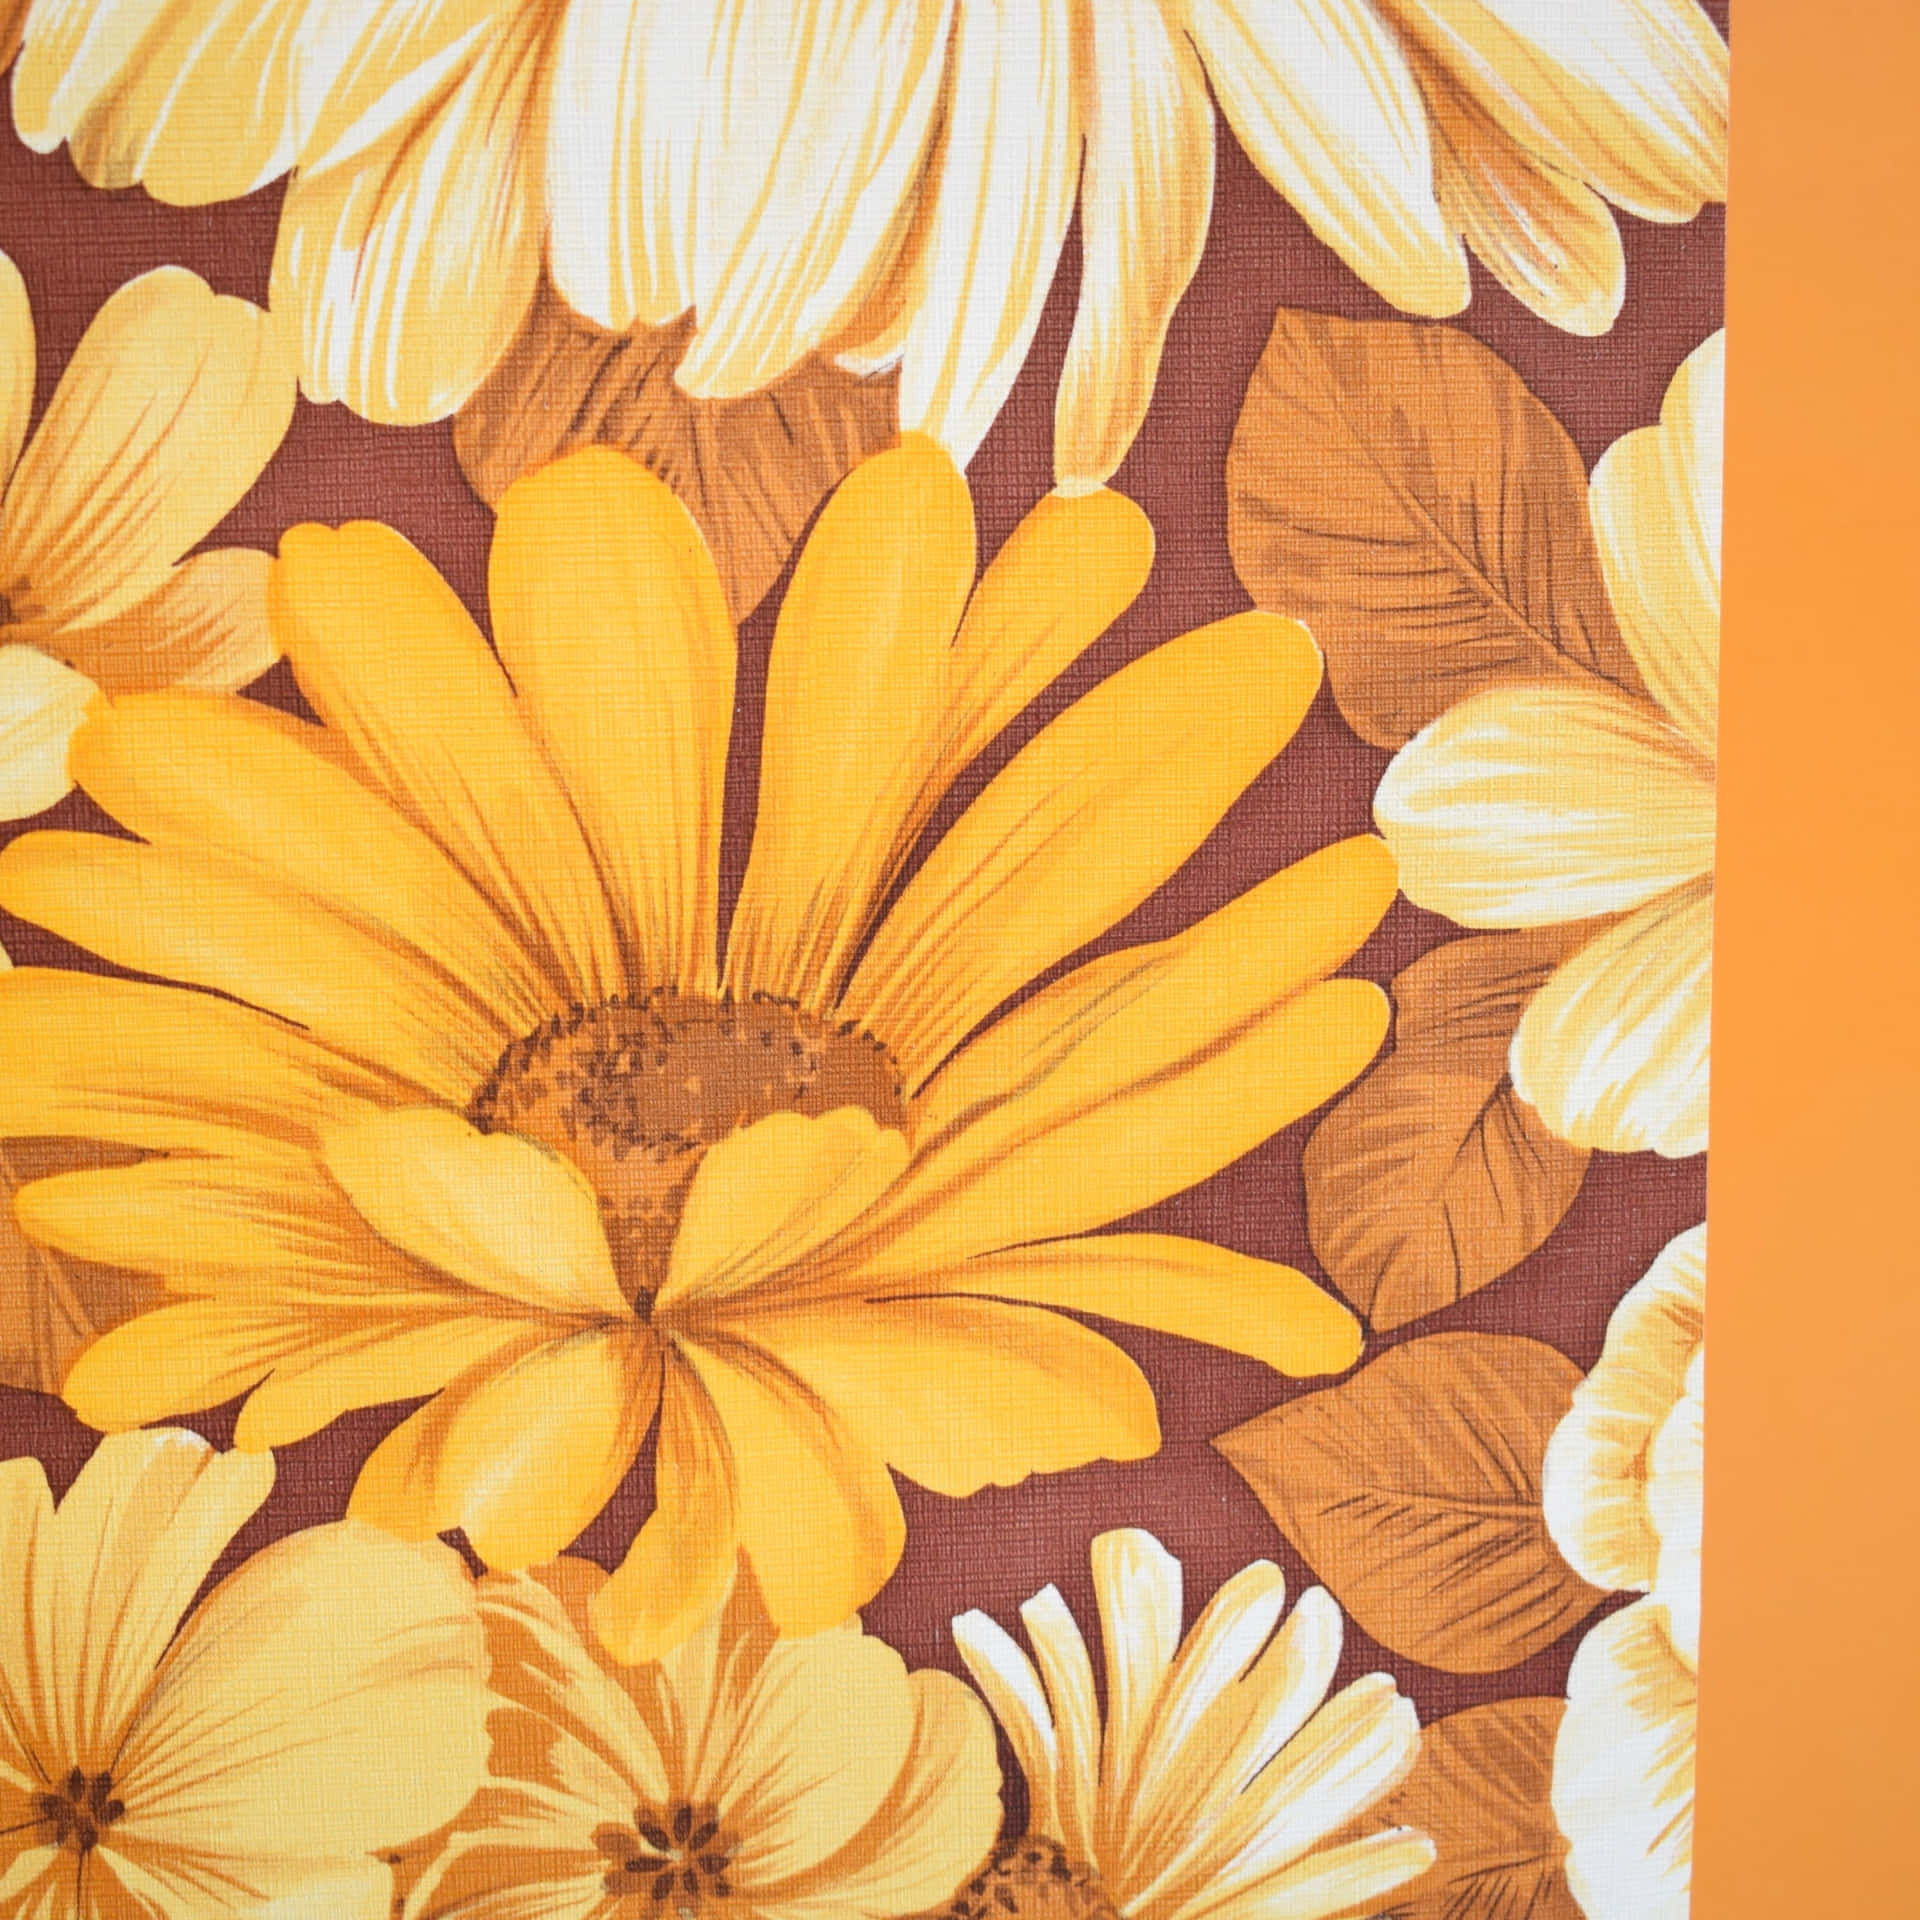 Vintage Yellow Flowers Pattern70s Style Wallpaper